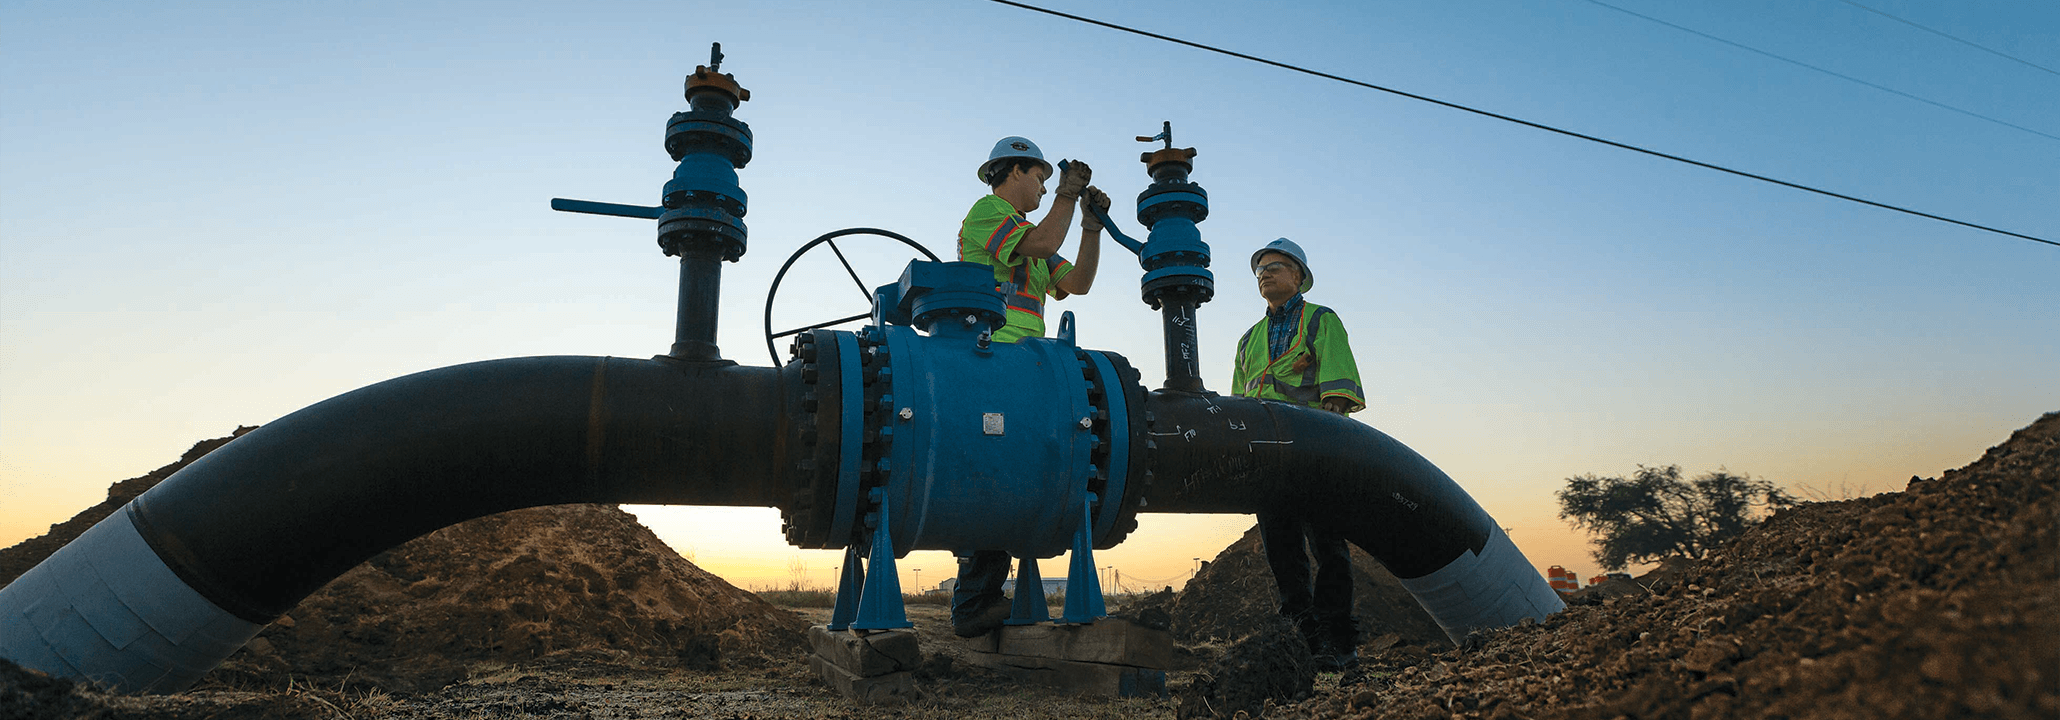 Two Atmos Energy employees working on large pipelines at dusk